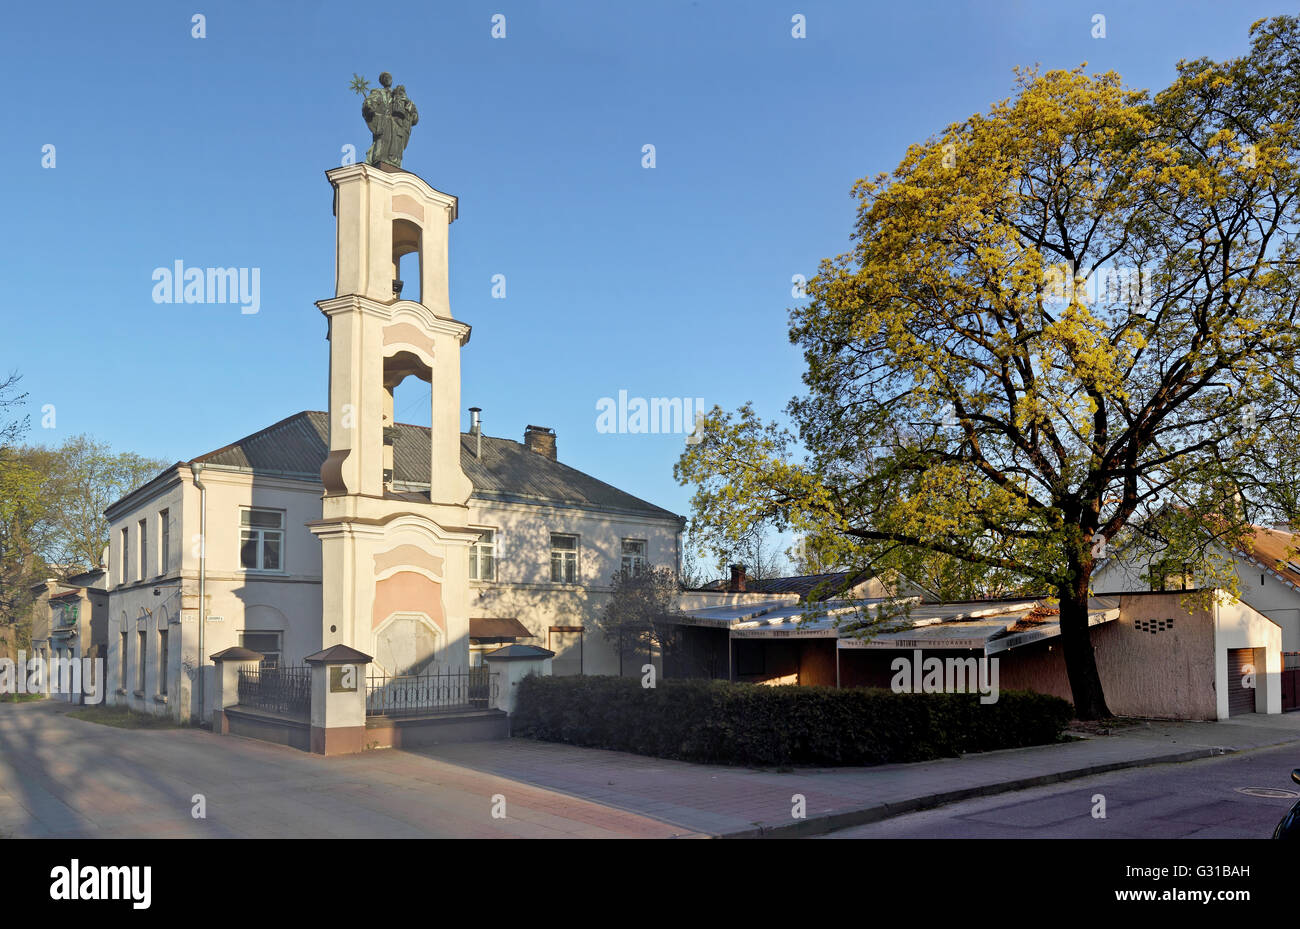 VILNIUS, LITHUANIA - MAY 04, 2016: Bronze depicts Saint Christopher with the infant Jesus in his hands statue on the Jovaro stre Stock Photo